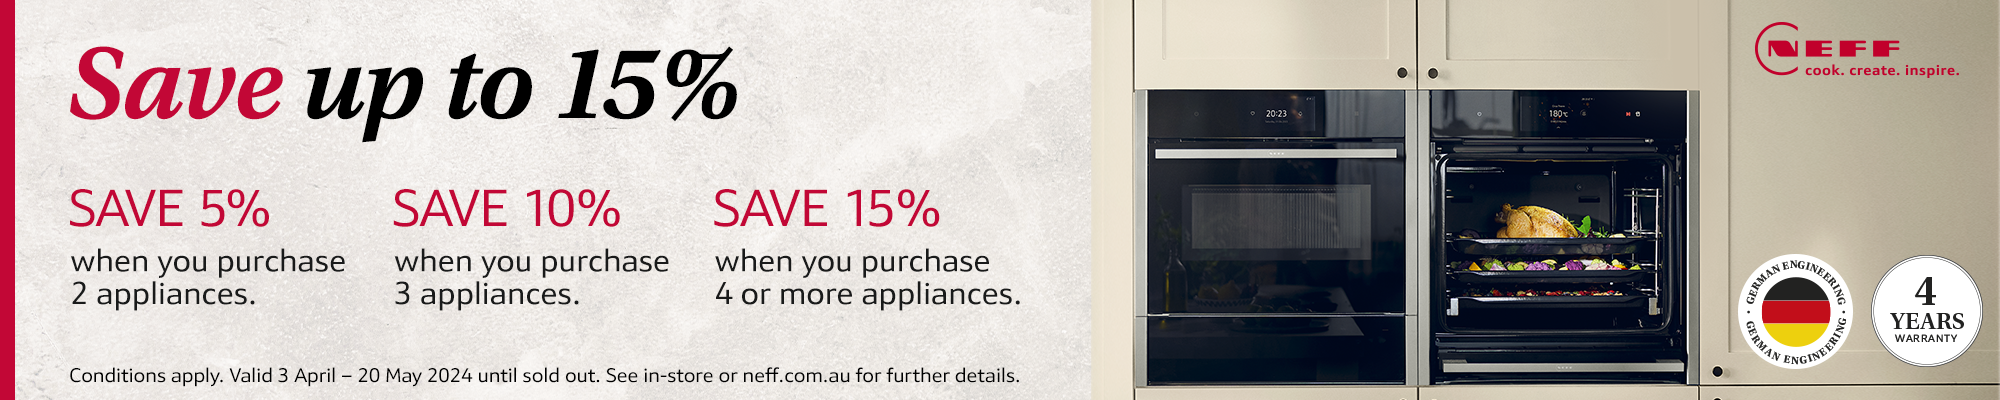 Save Up To 15% On Neff Appliances*